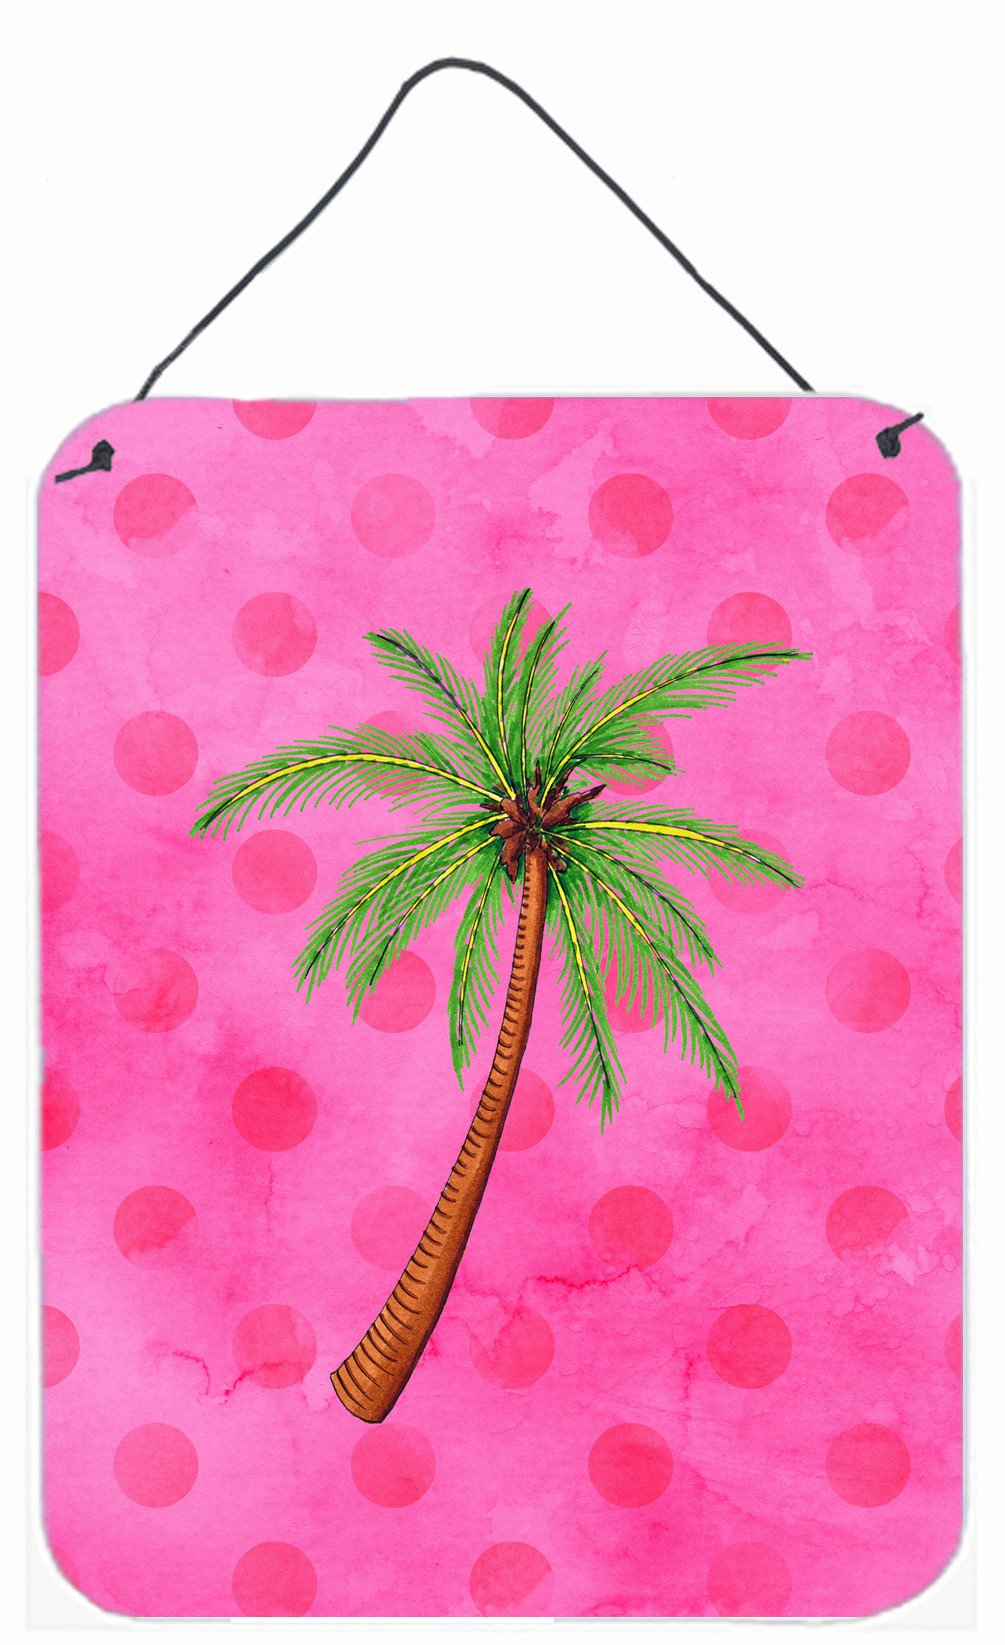 Palm Tree Pink Polkadot Wall or Door Hanging Prints BB8169DS1216 by Caroline's Treasures